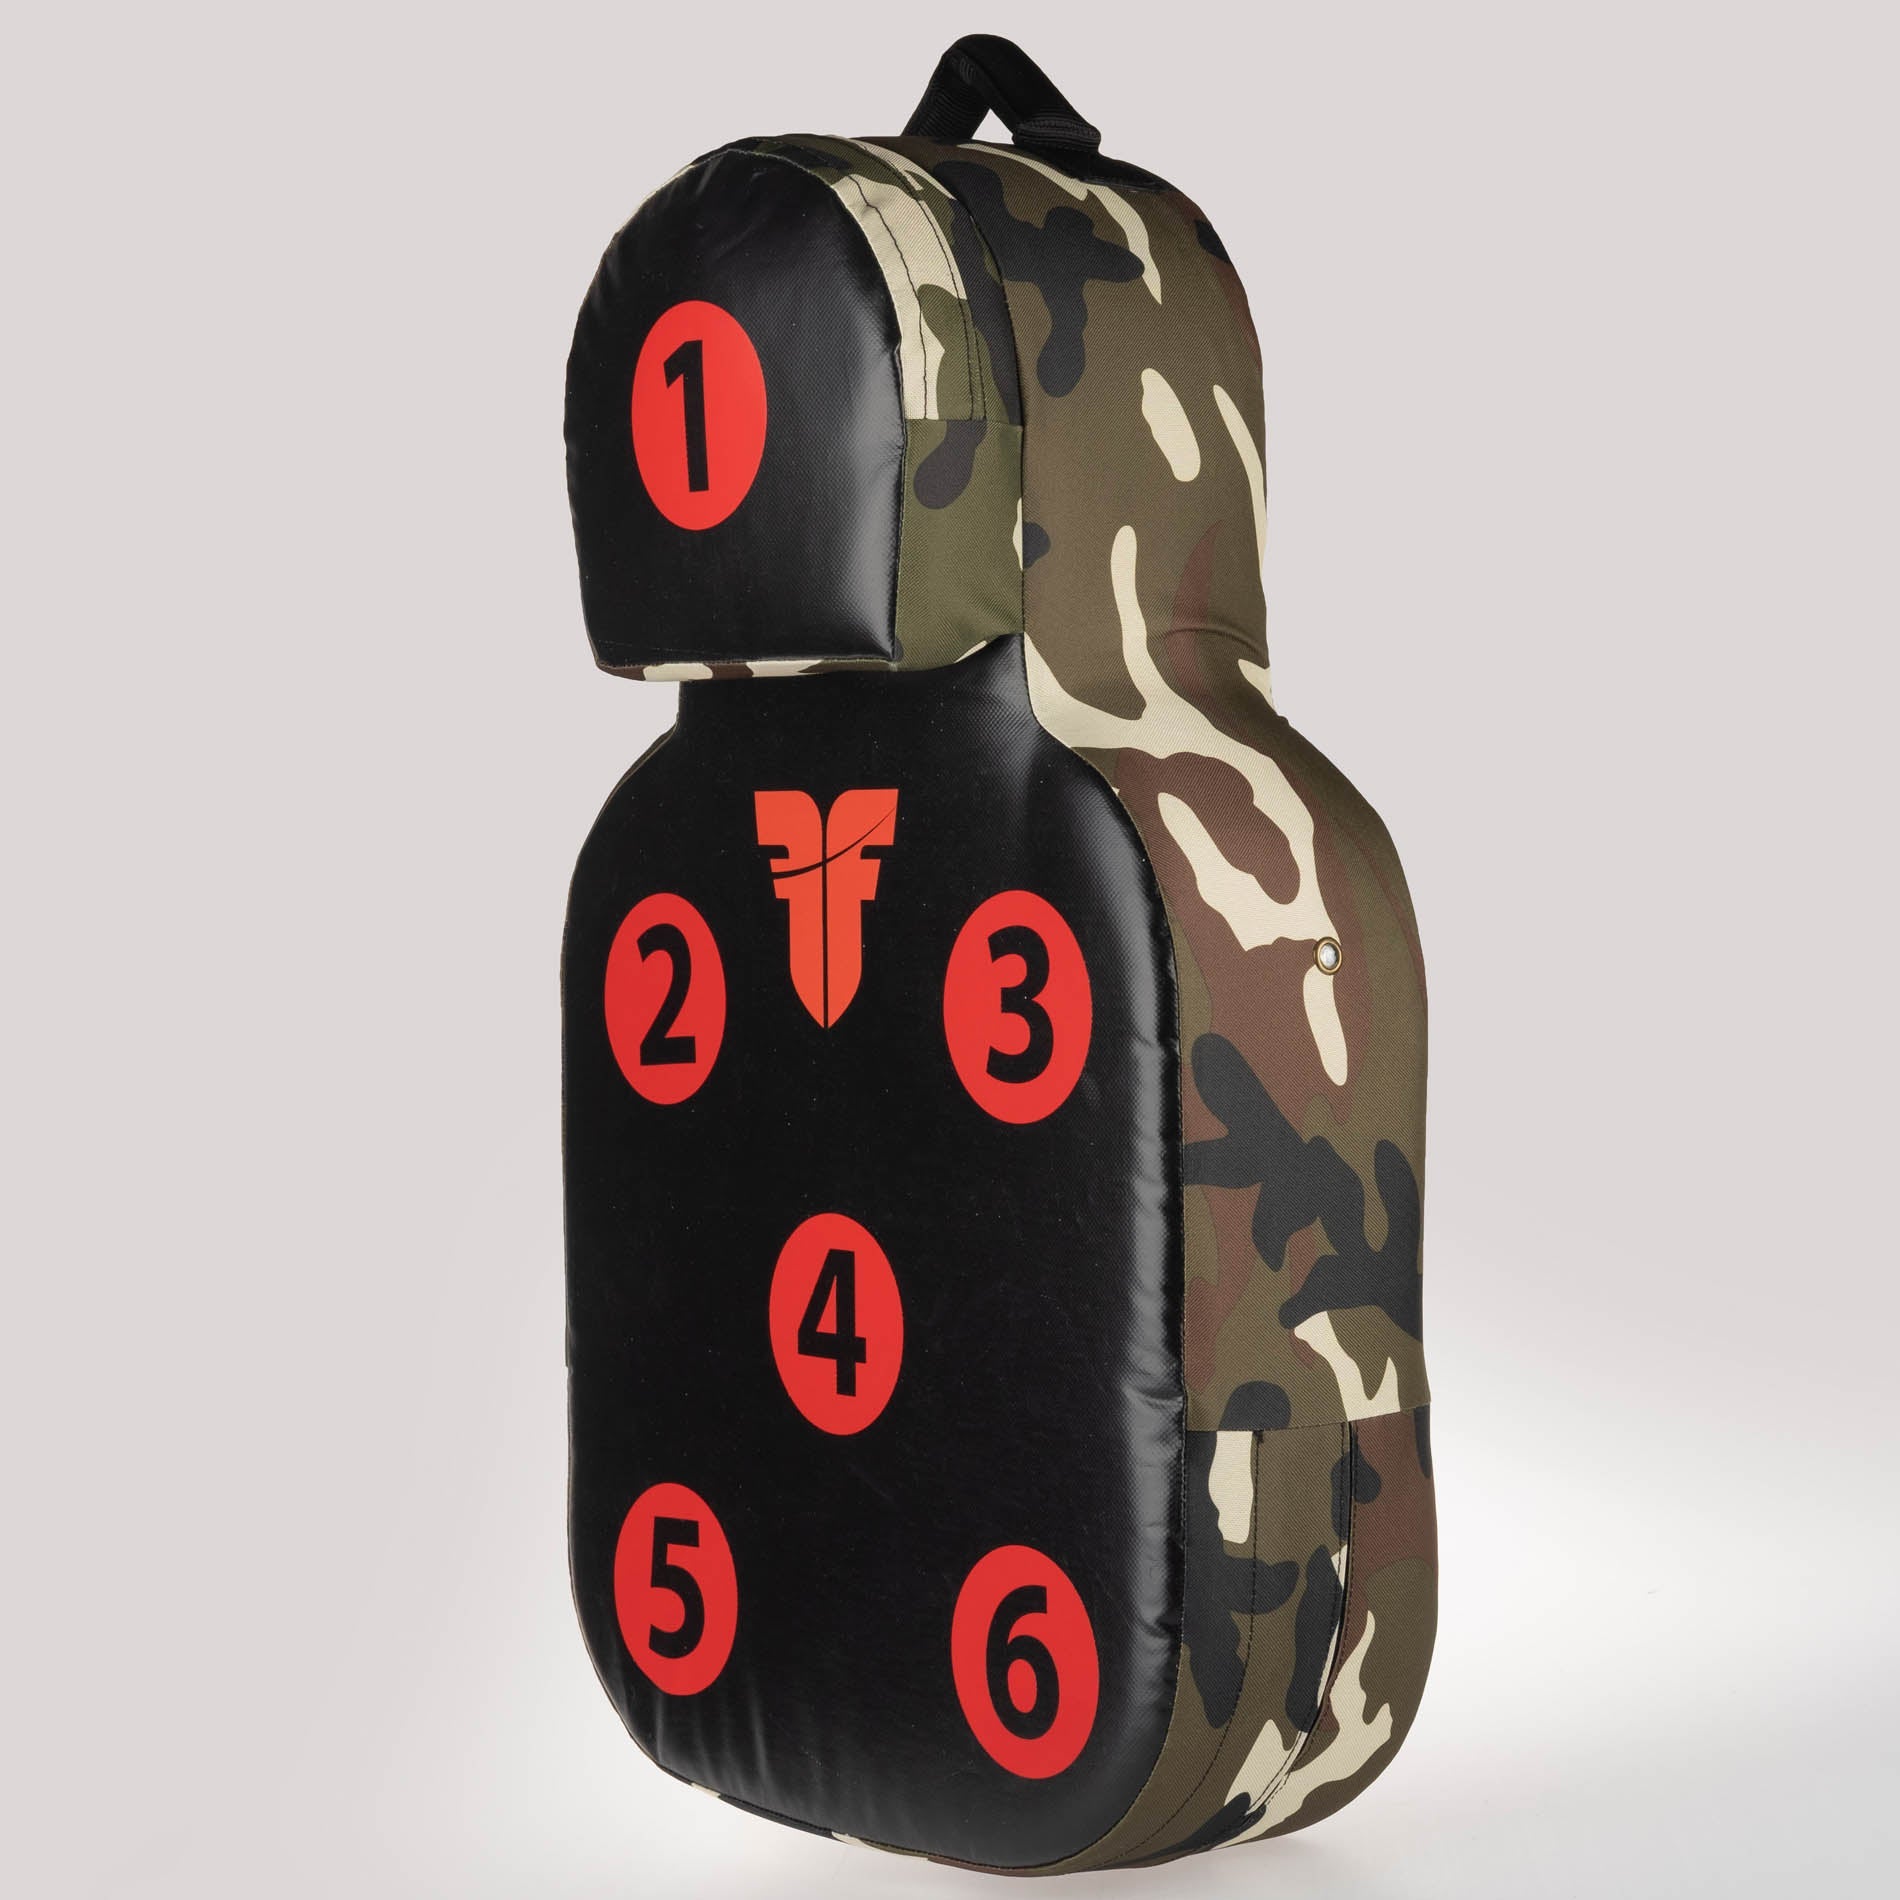 Fighter Training Power Wall SET - army green camo/red, FPWS-01-CB